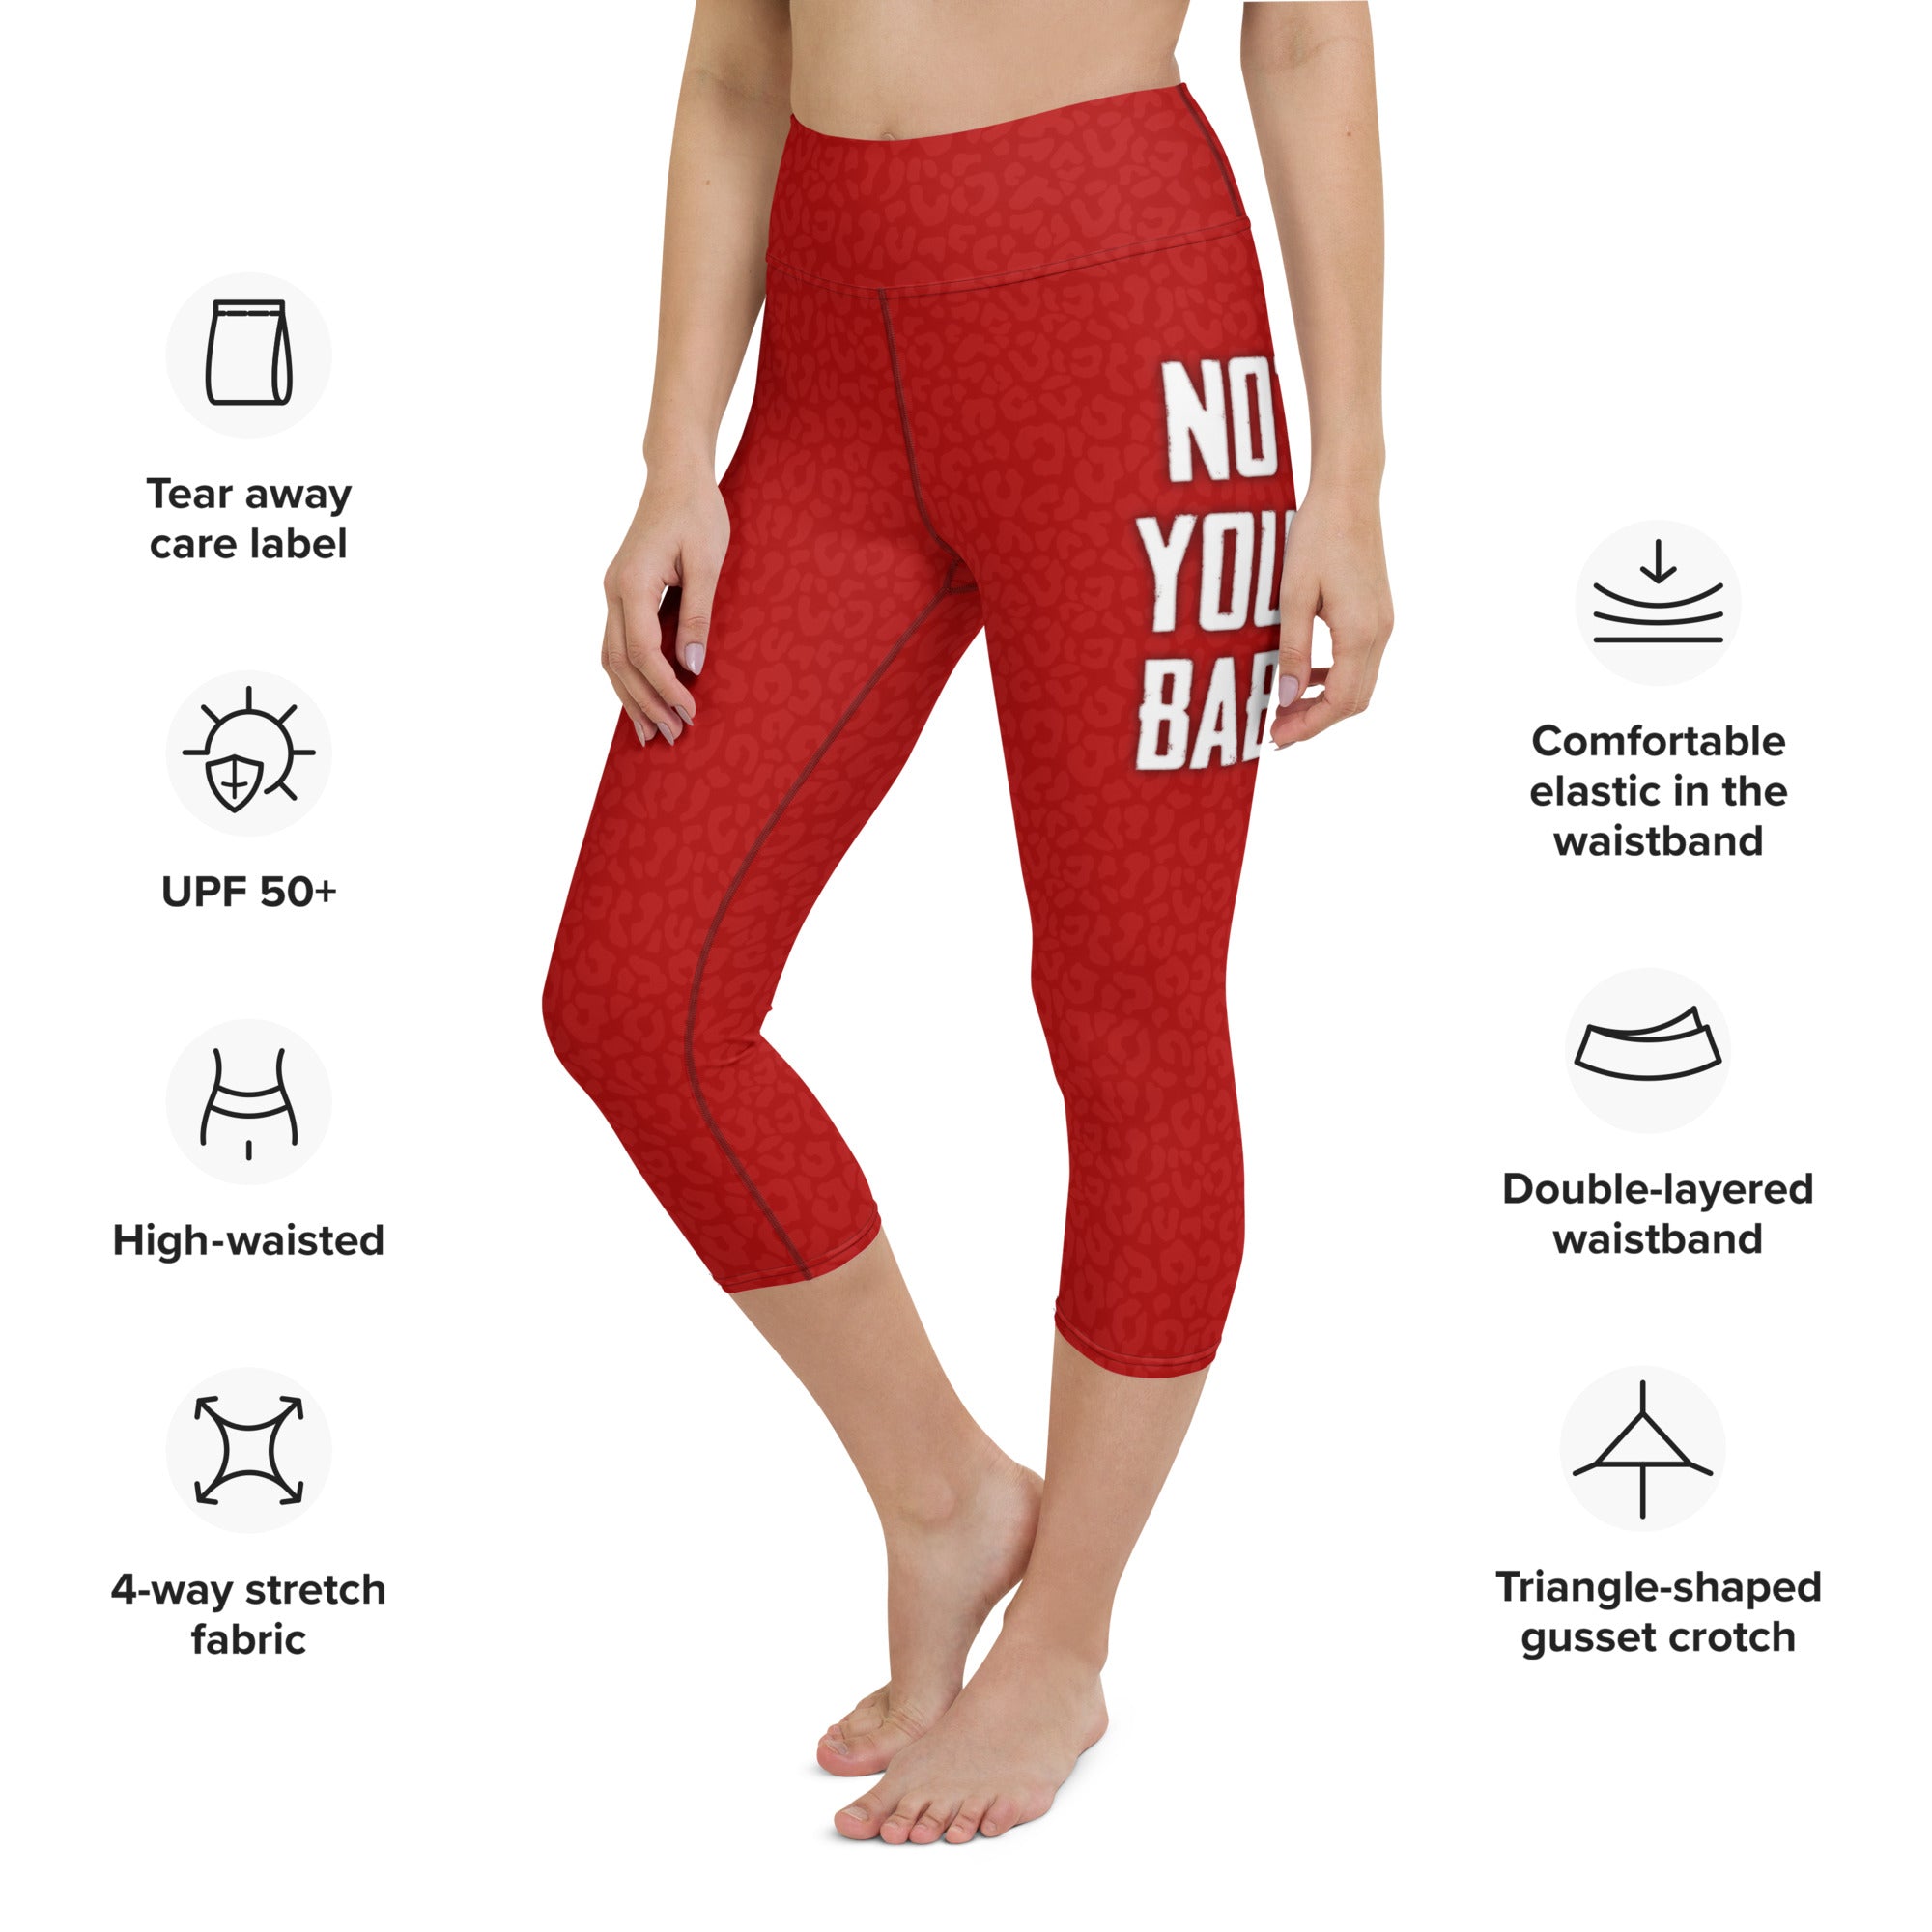 Not Your Babe Yoga Capris